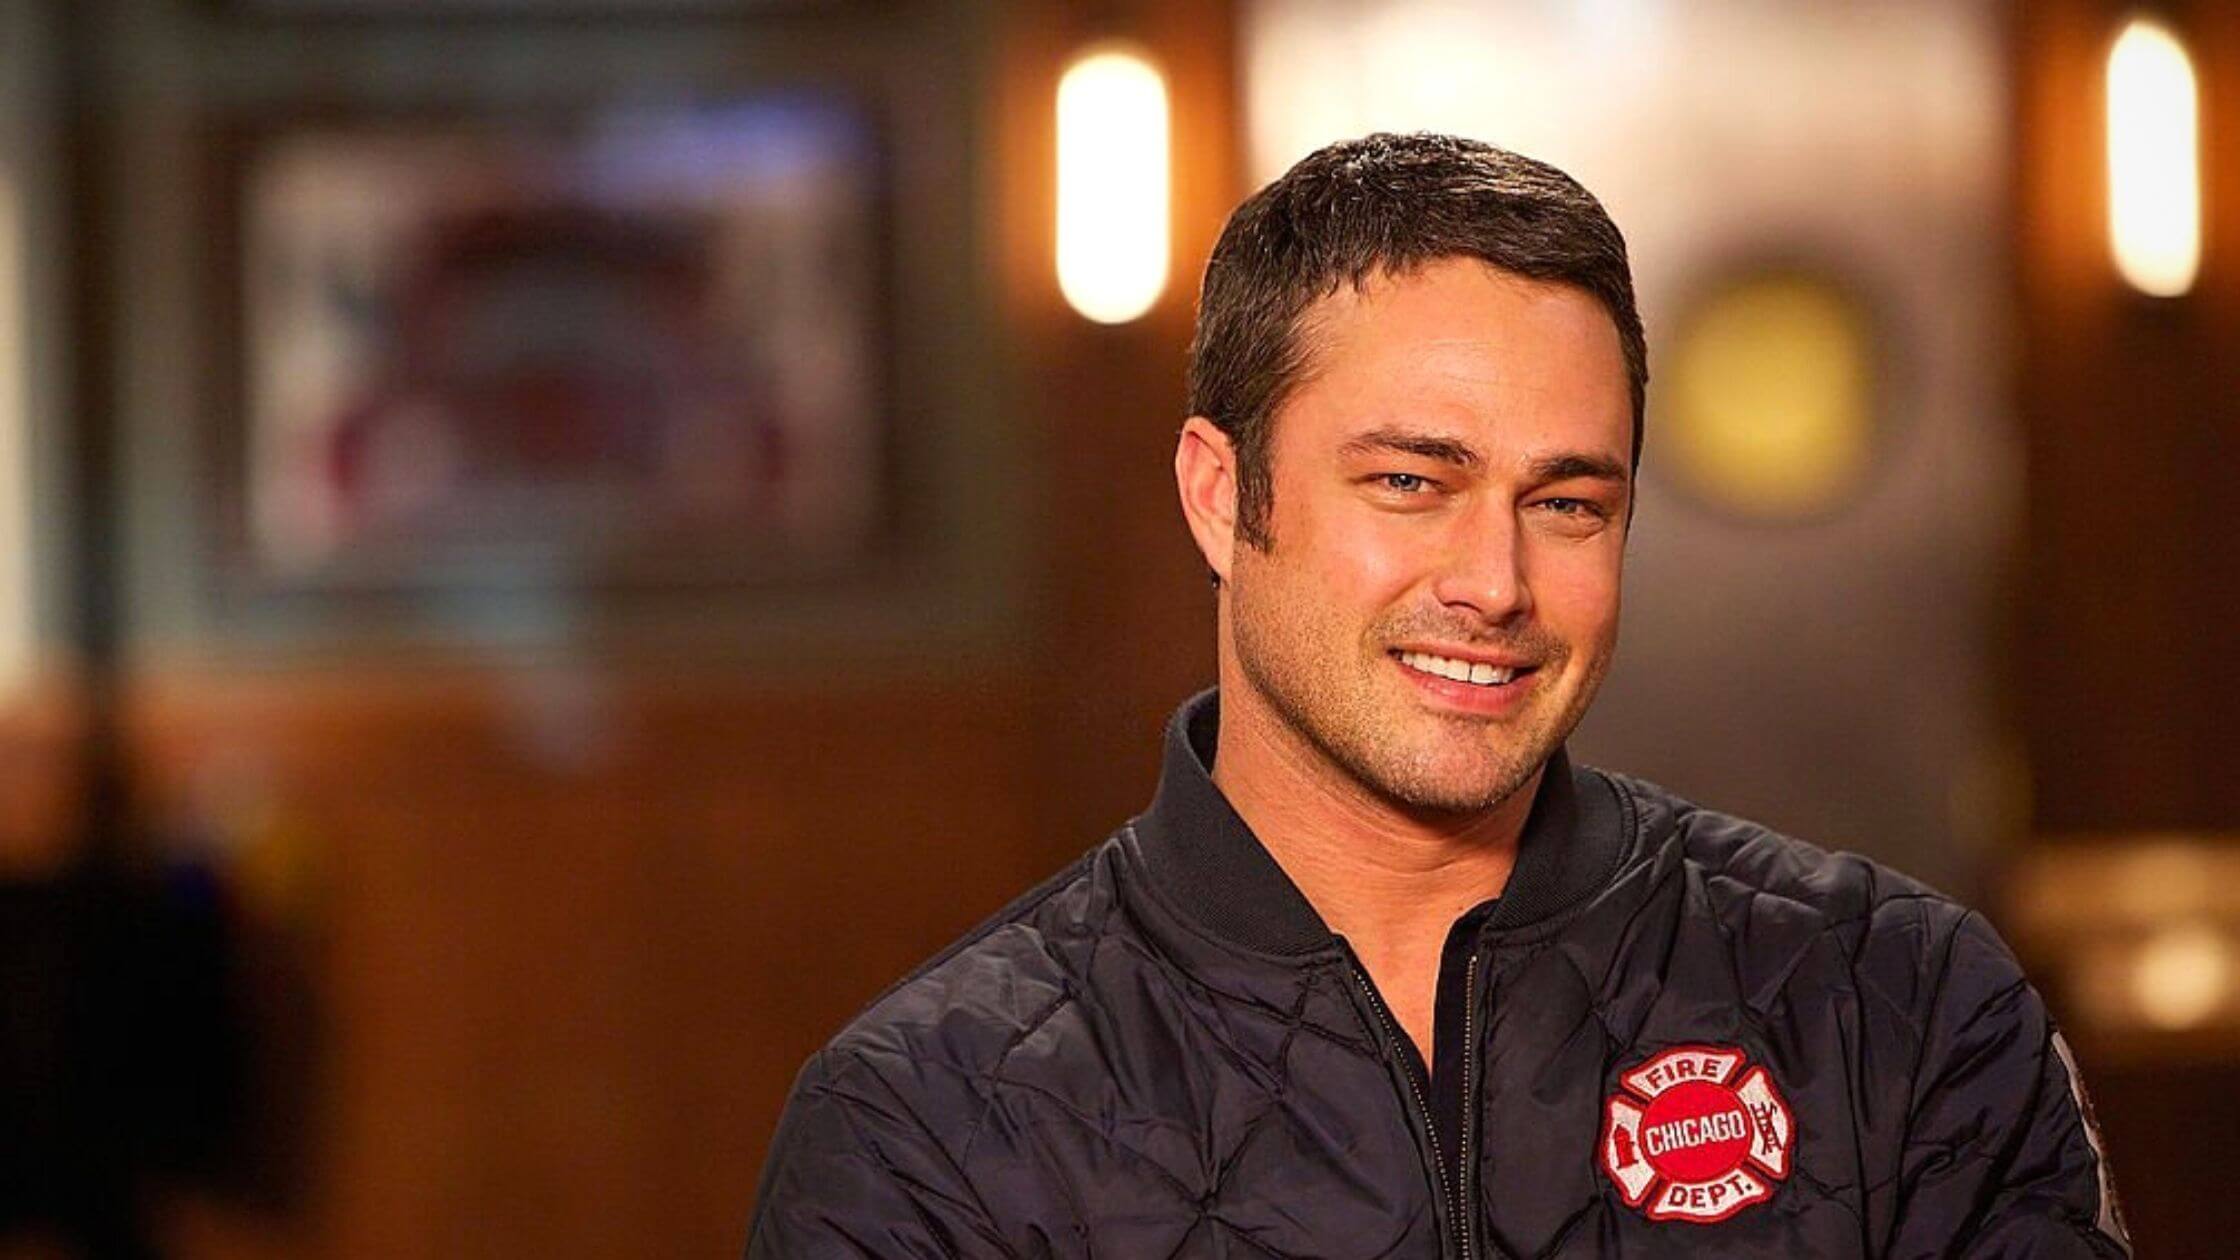 Who Is Lady Gaga’s Ex-Fiance, Taylor Kinney Dating Now? A Closer Look At The Dating History Of Taylor Kinney